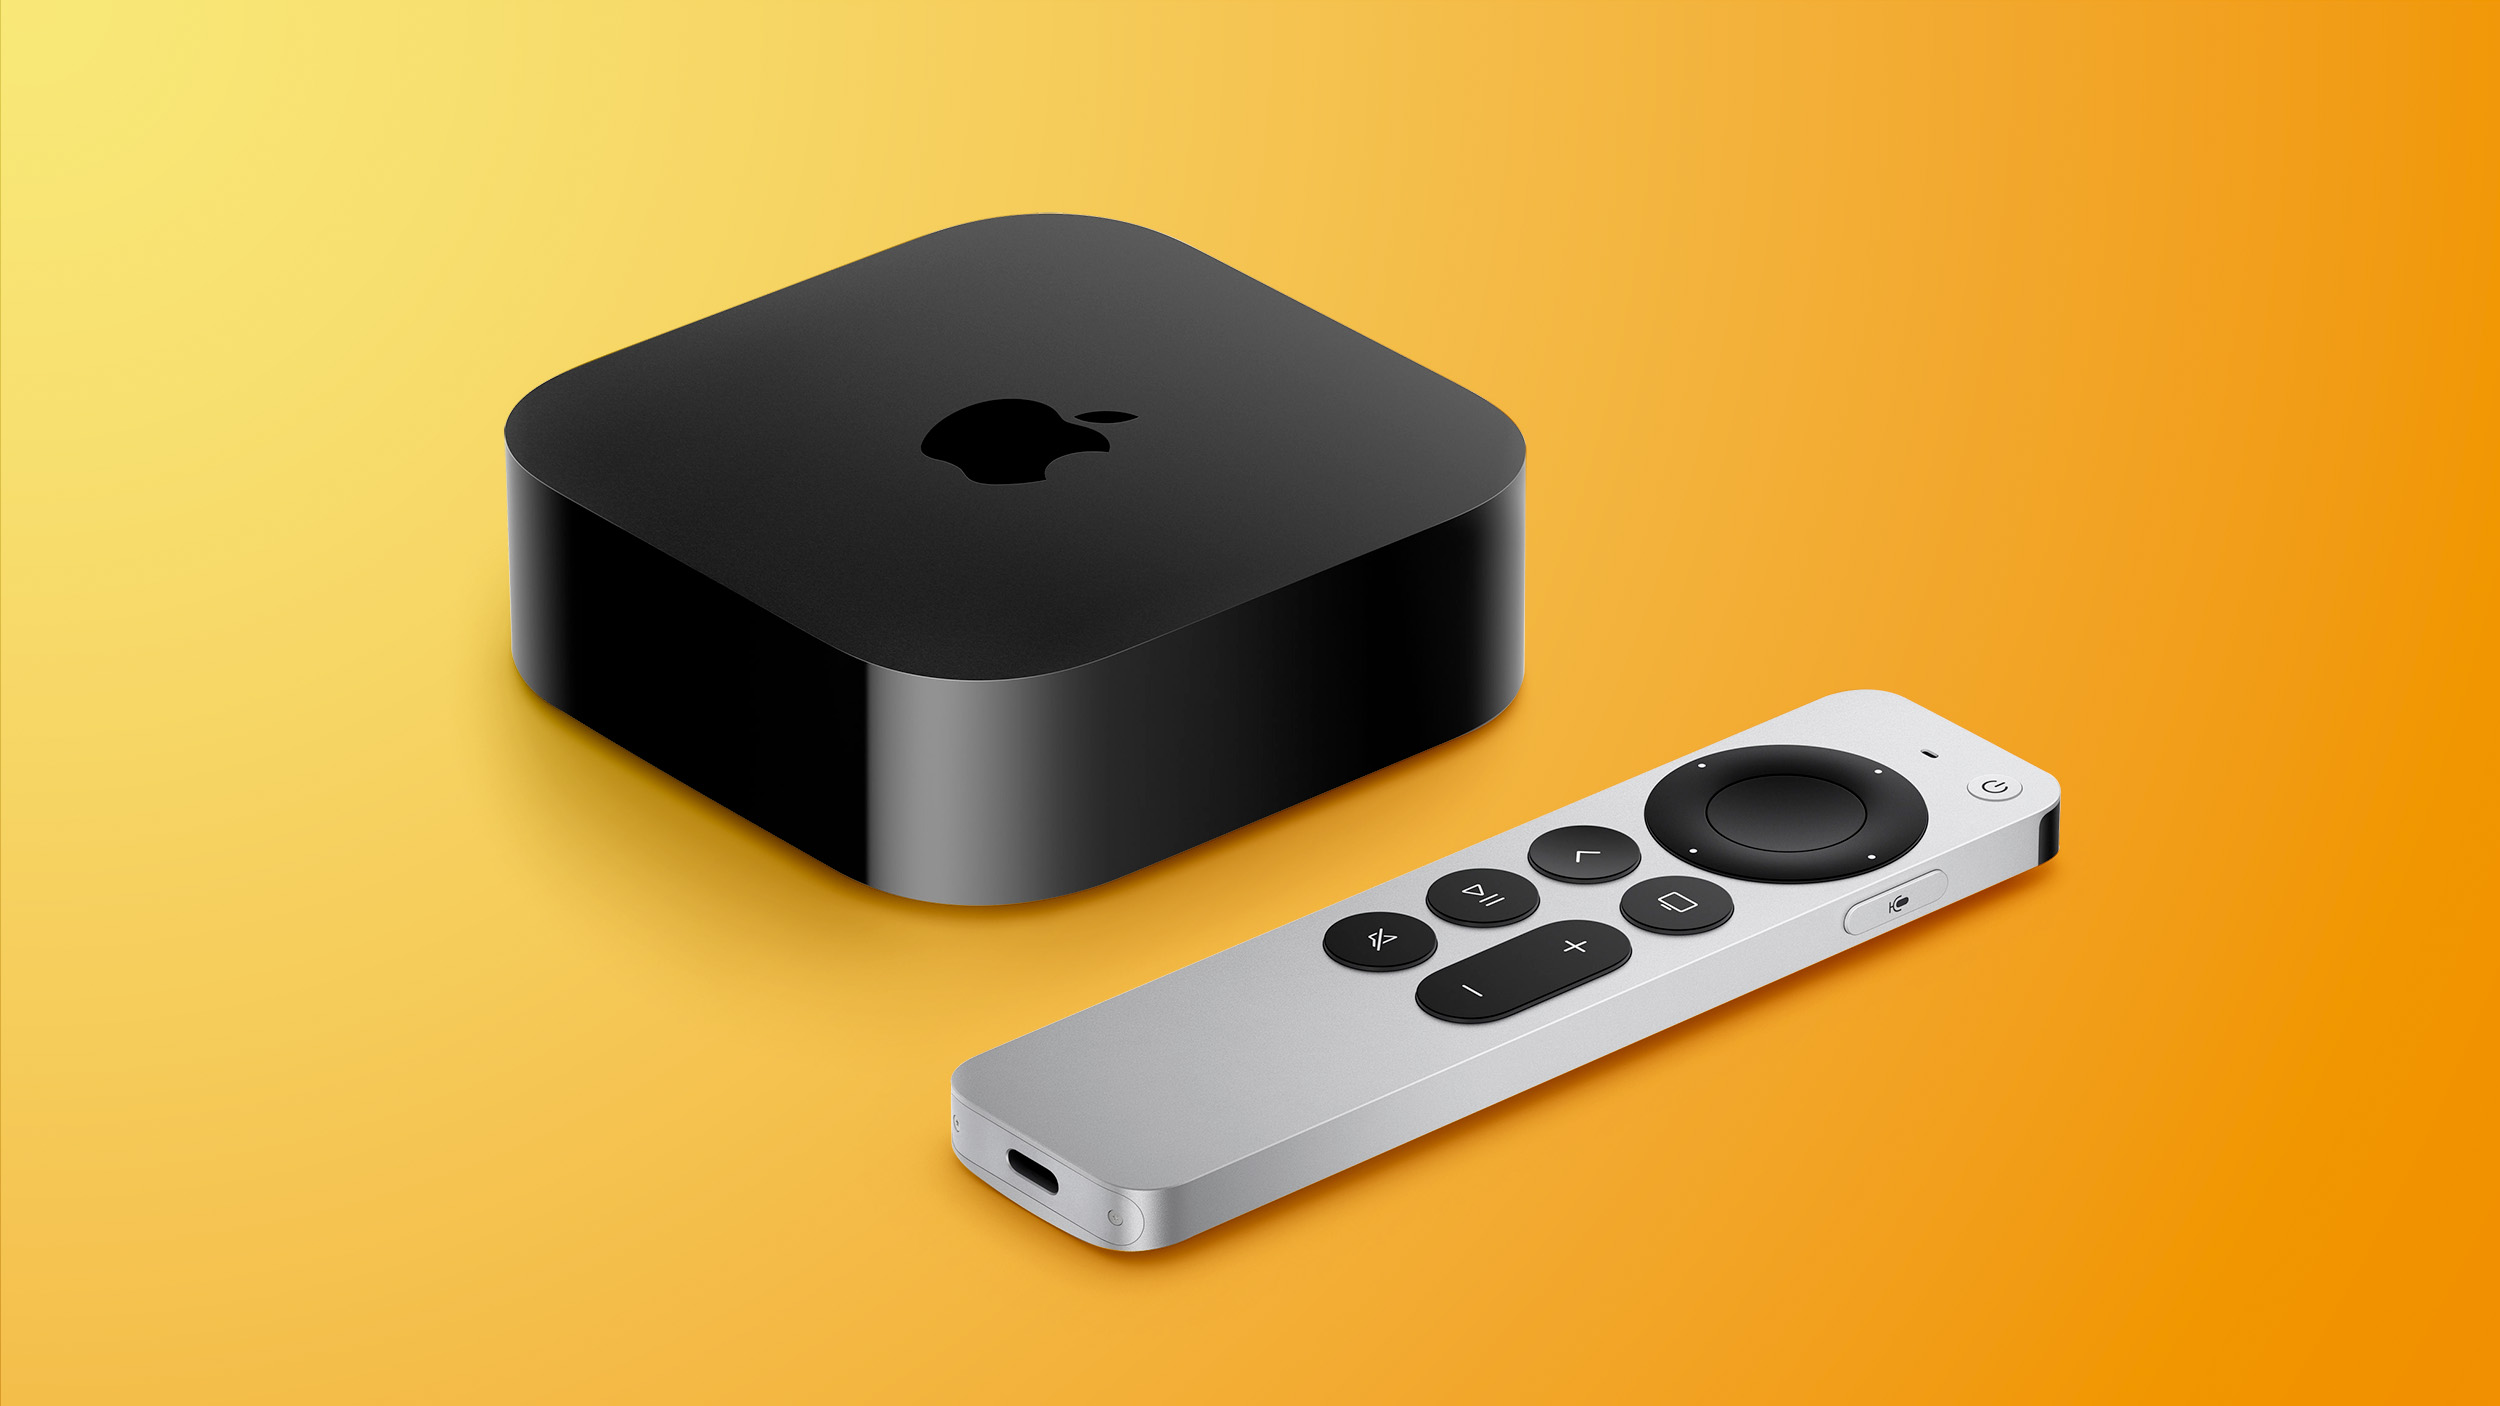 New Apple TV Now Available at Apple Stores With These 10 Changes